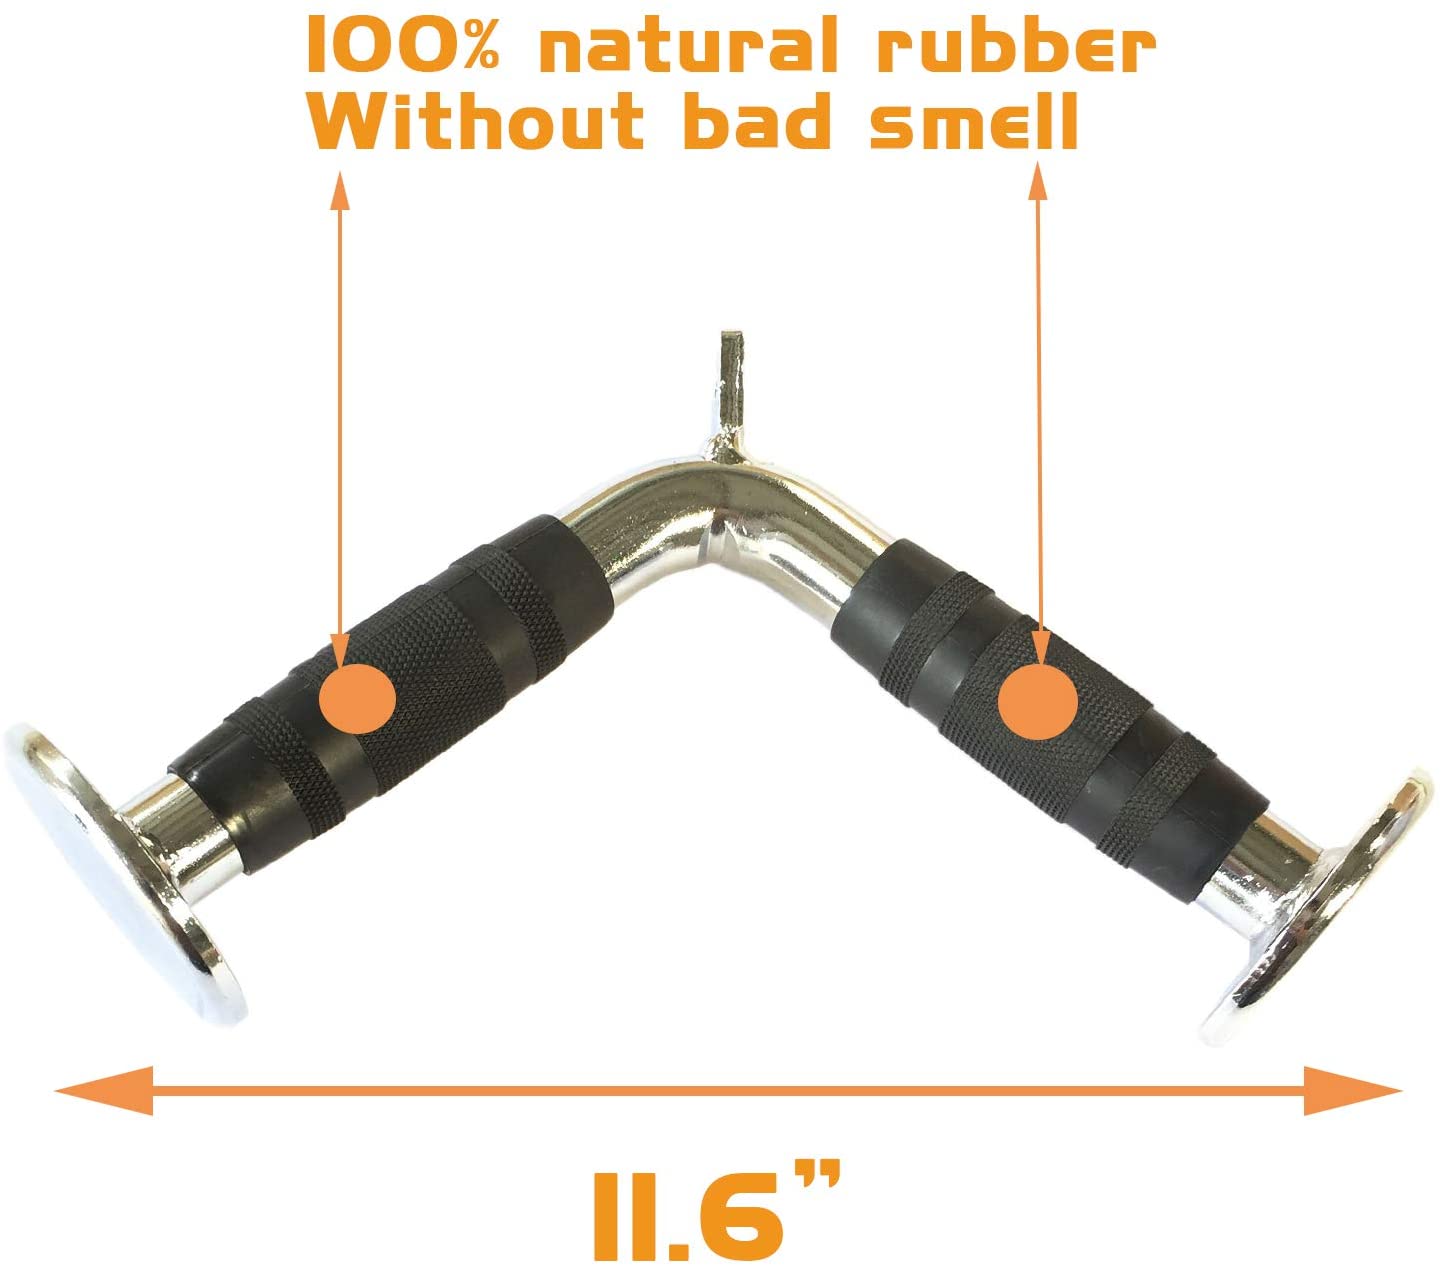 Rubber Coated V Push Down Bar Attachment - For Cable Machines